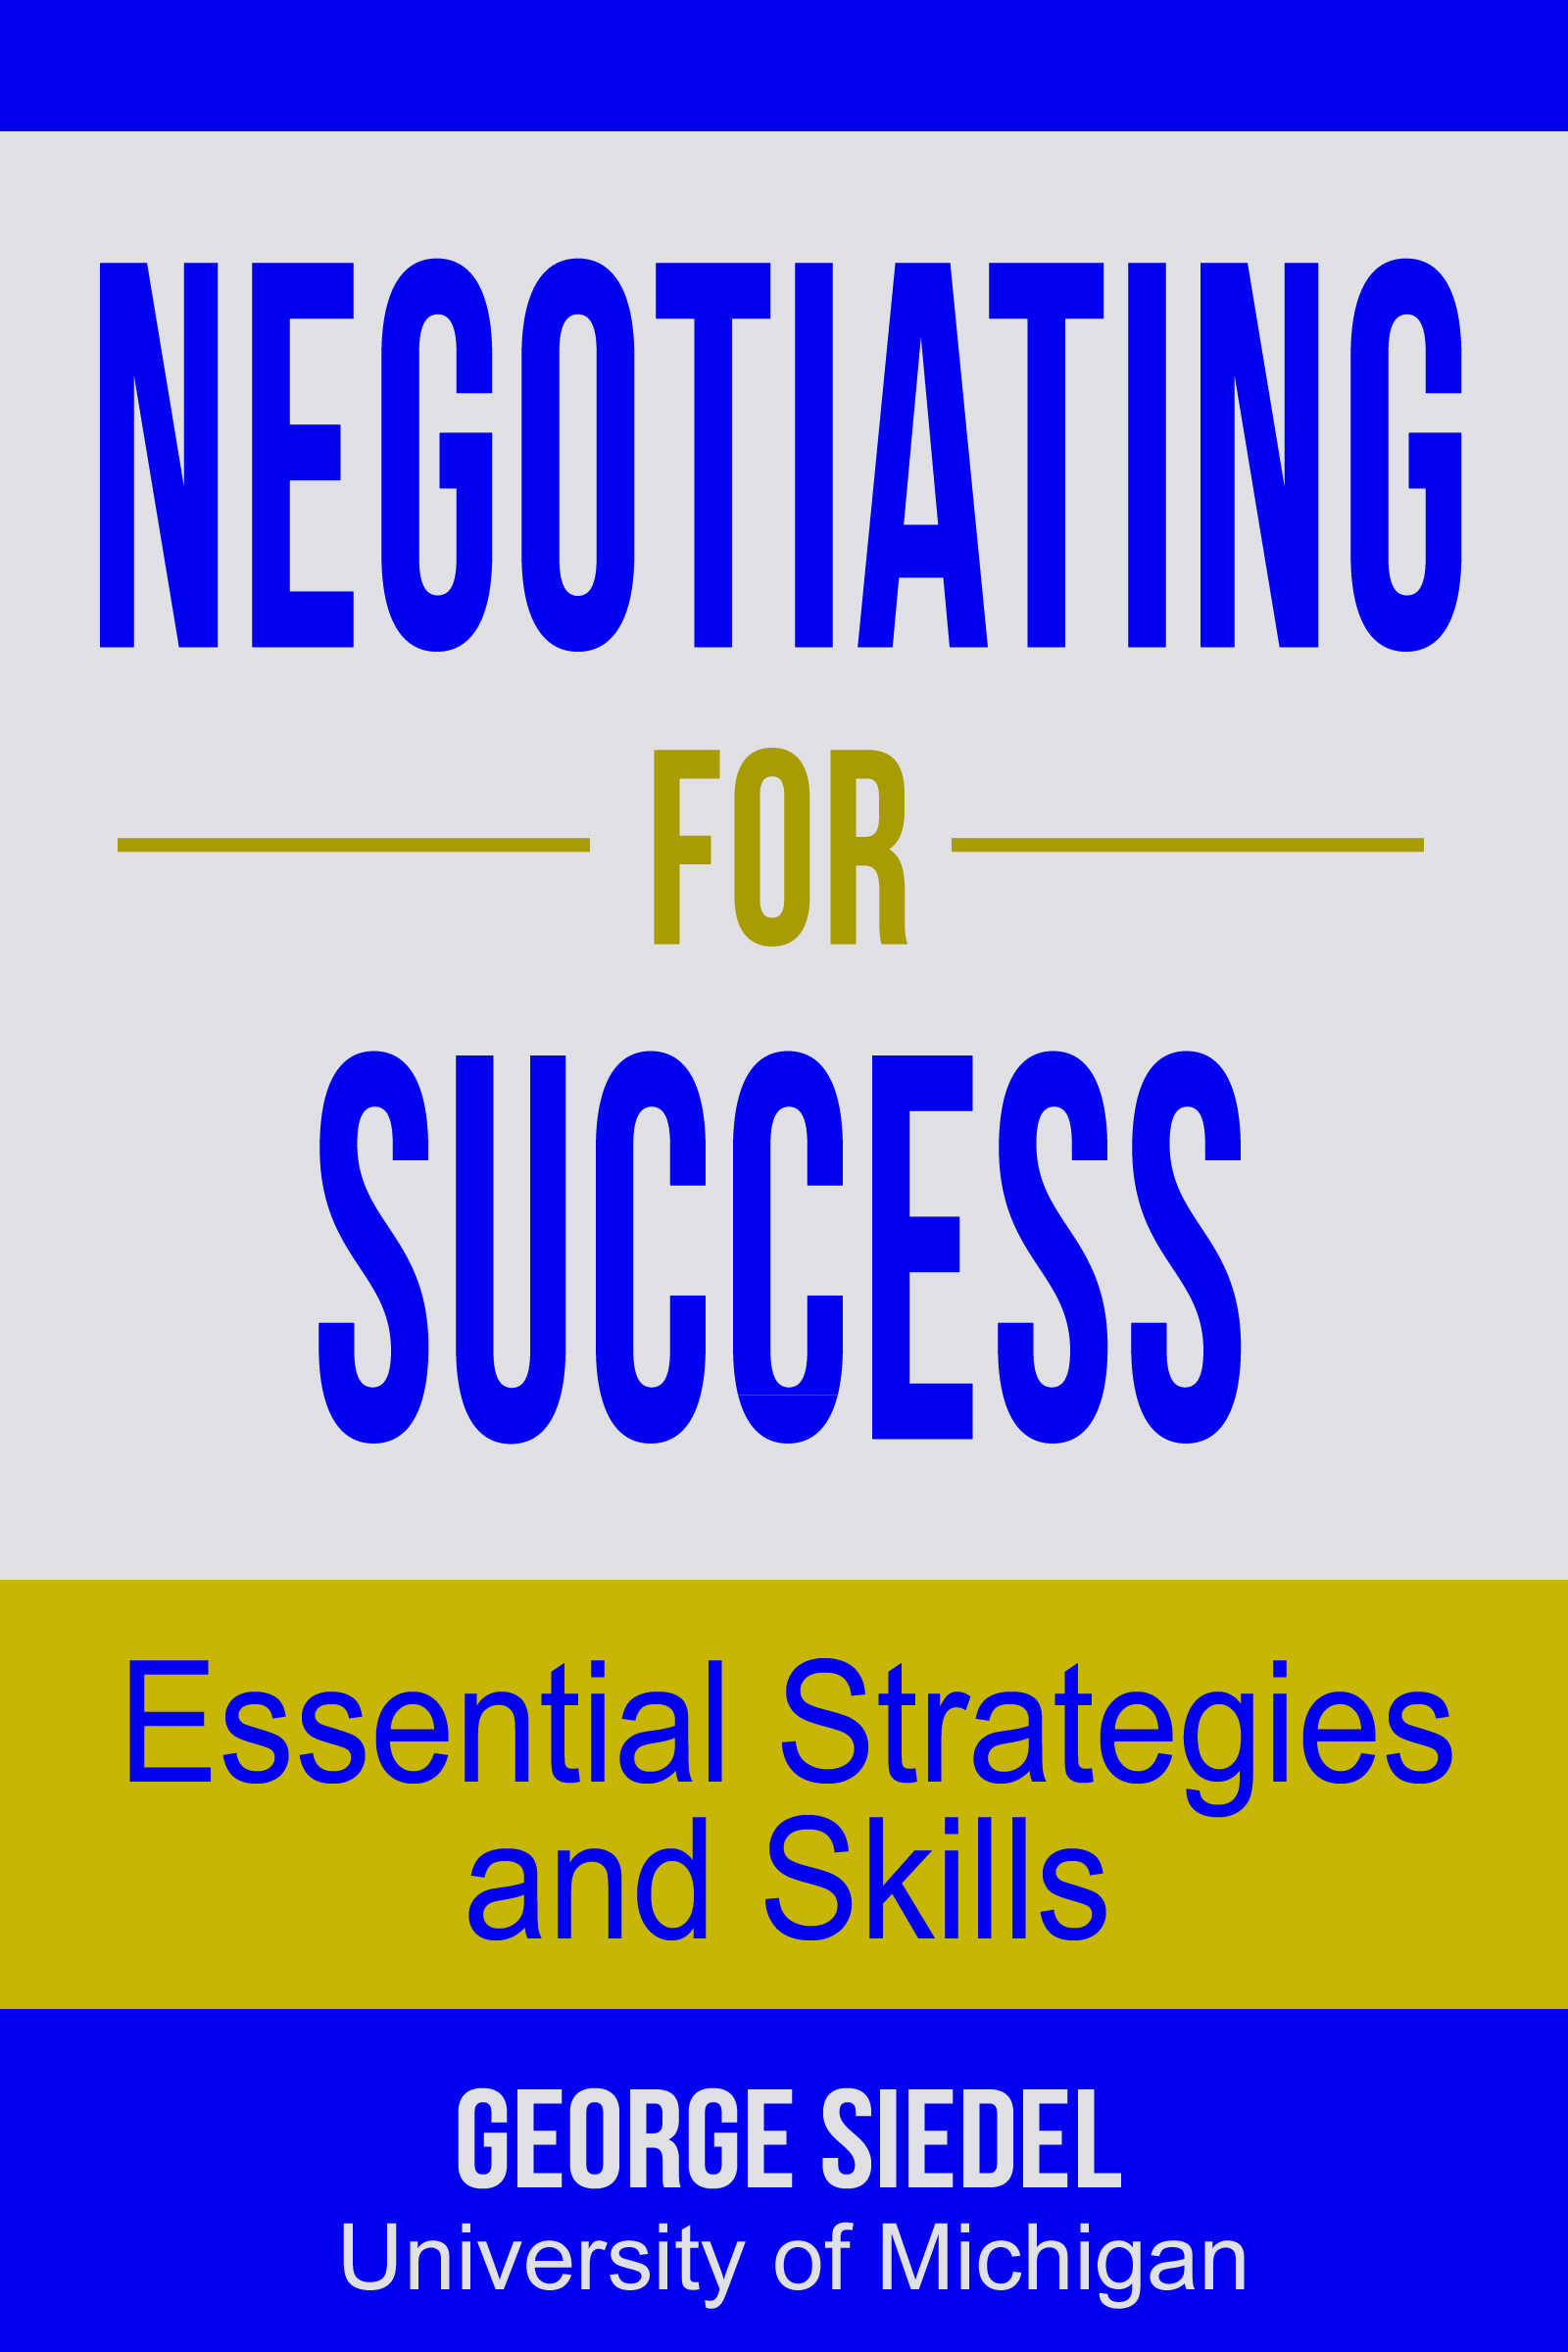 Smashwords Negotiating for Success Essential Strategies and Skills a book by Siedel